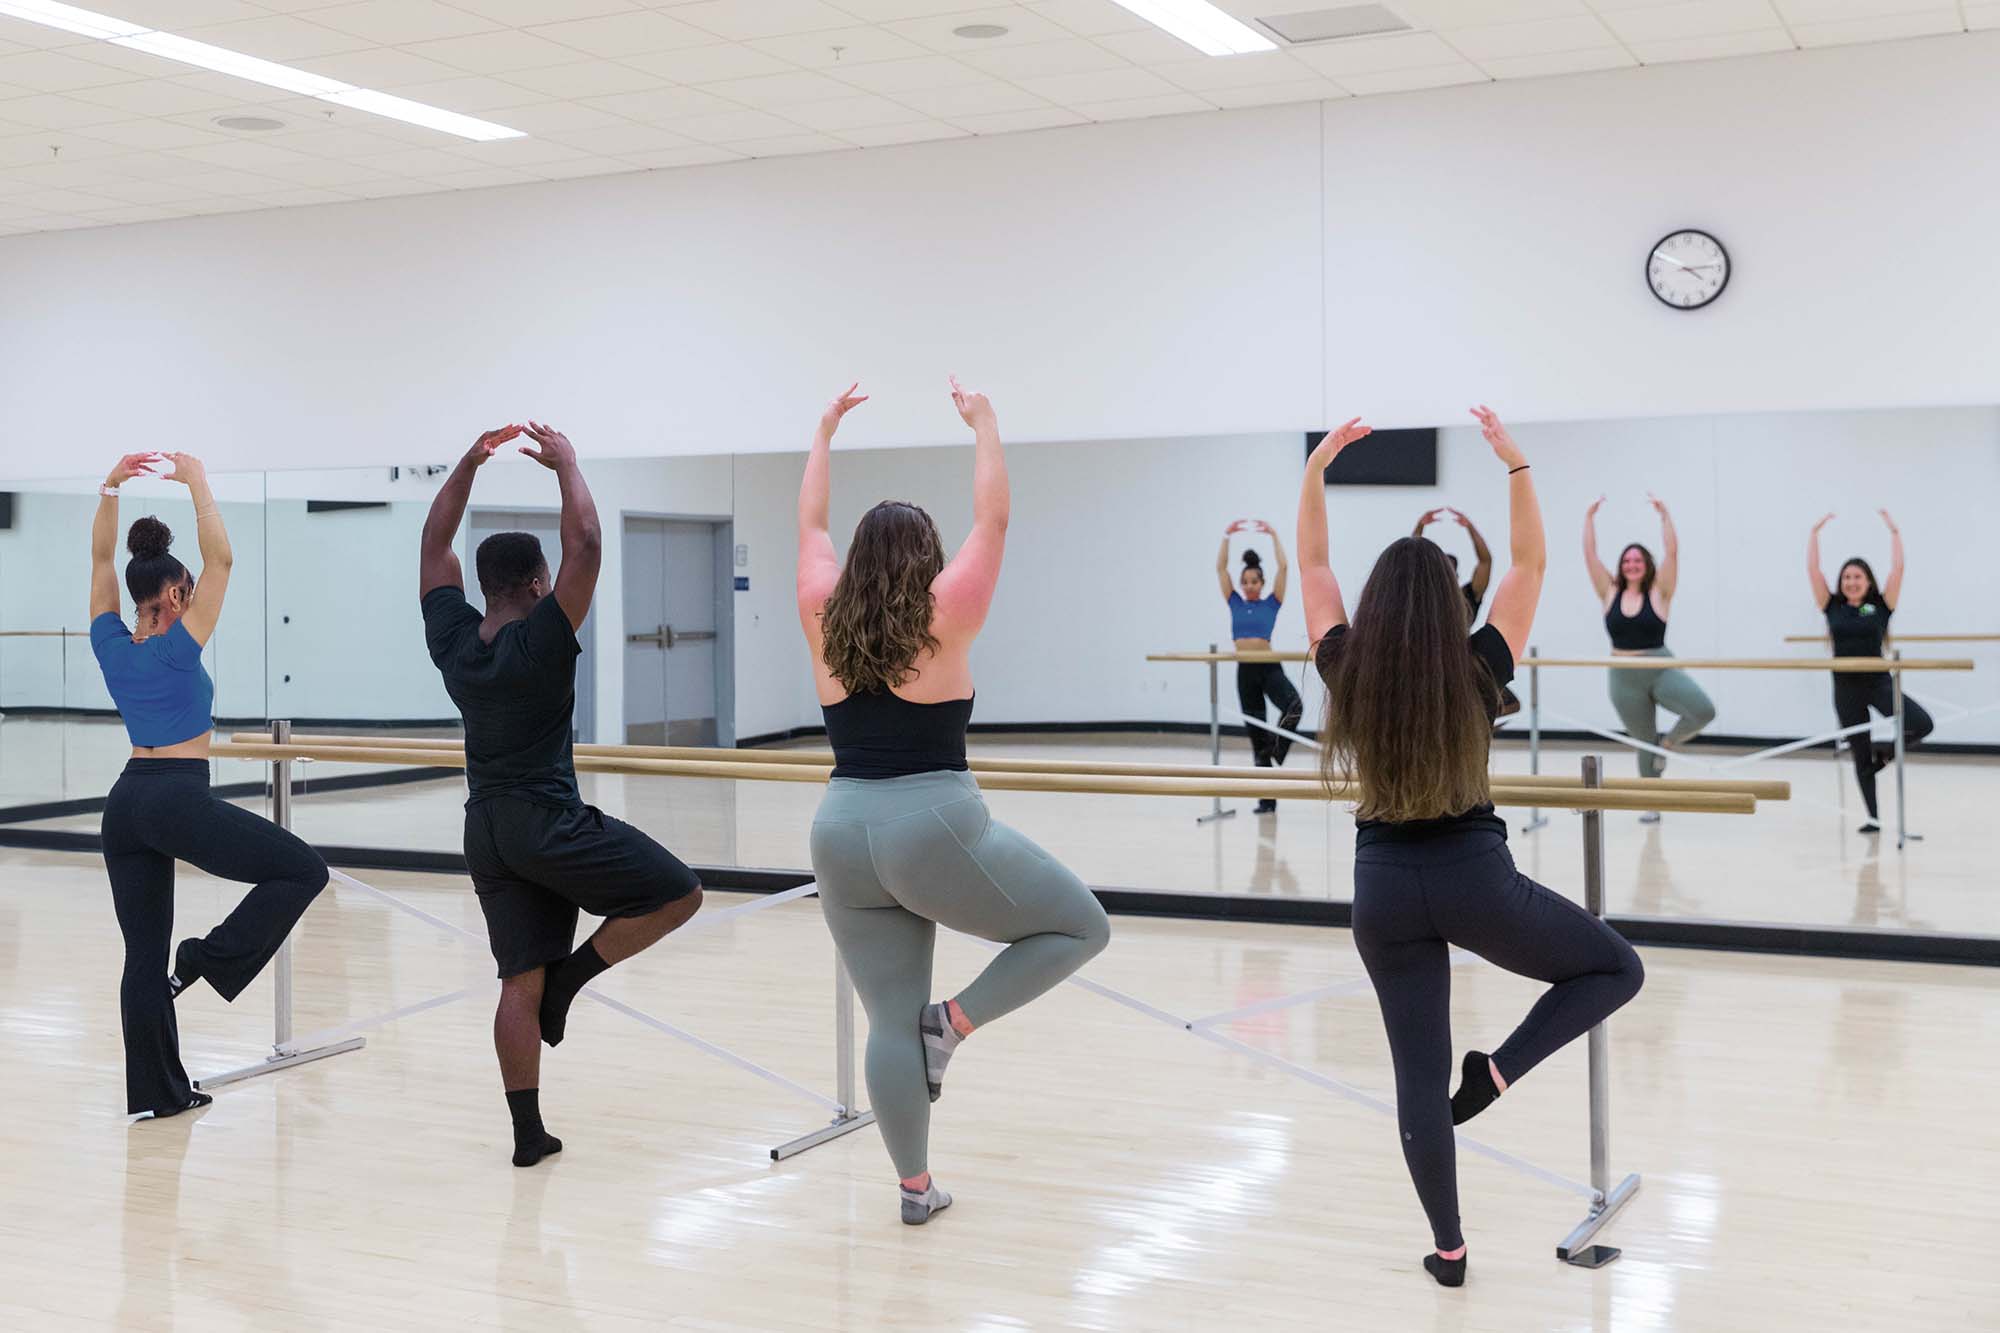 students following an instructor teaching in a ballet studio